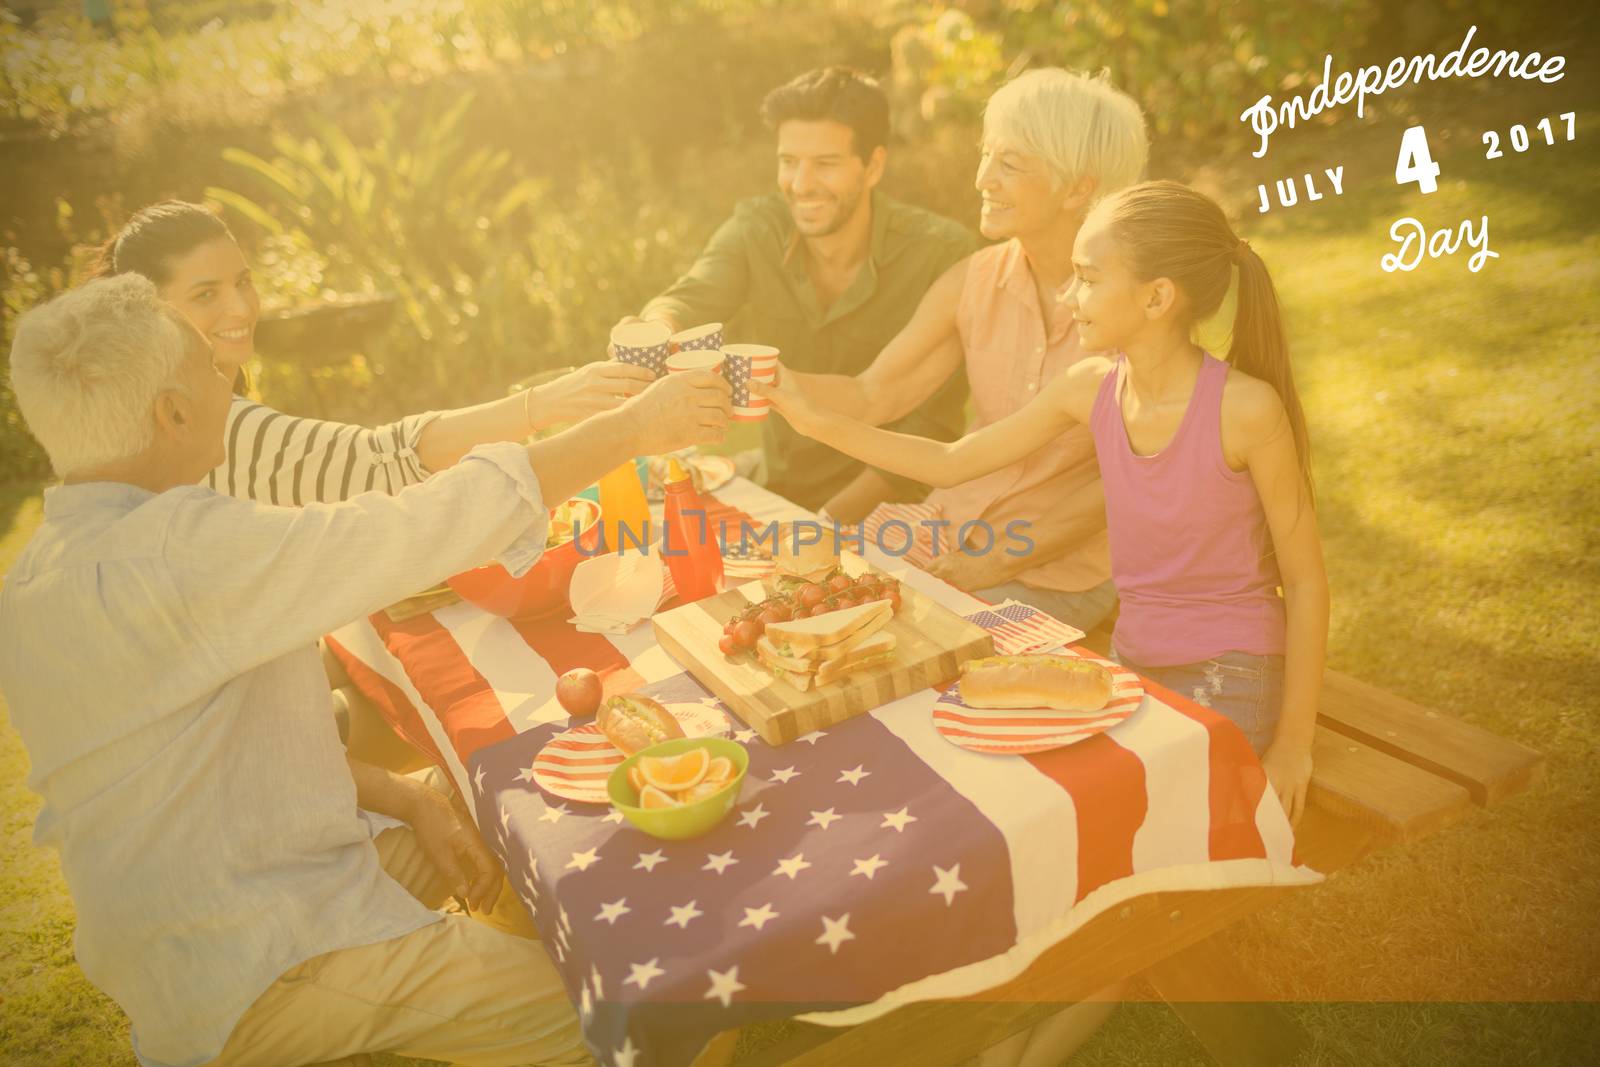 Digitally generated image of happy 4th of july message against happy family having a picnic